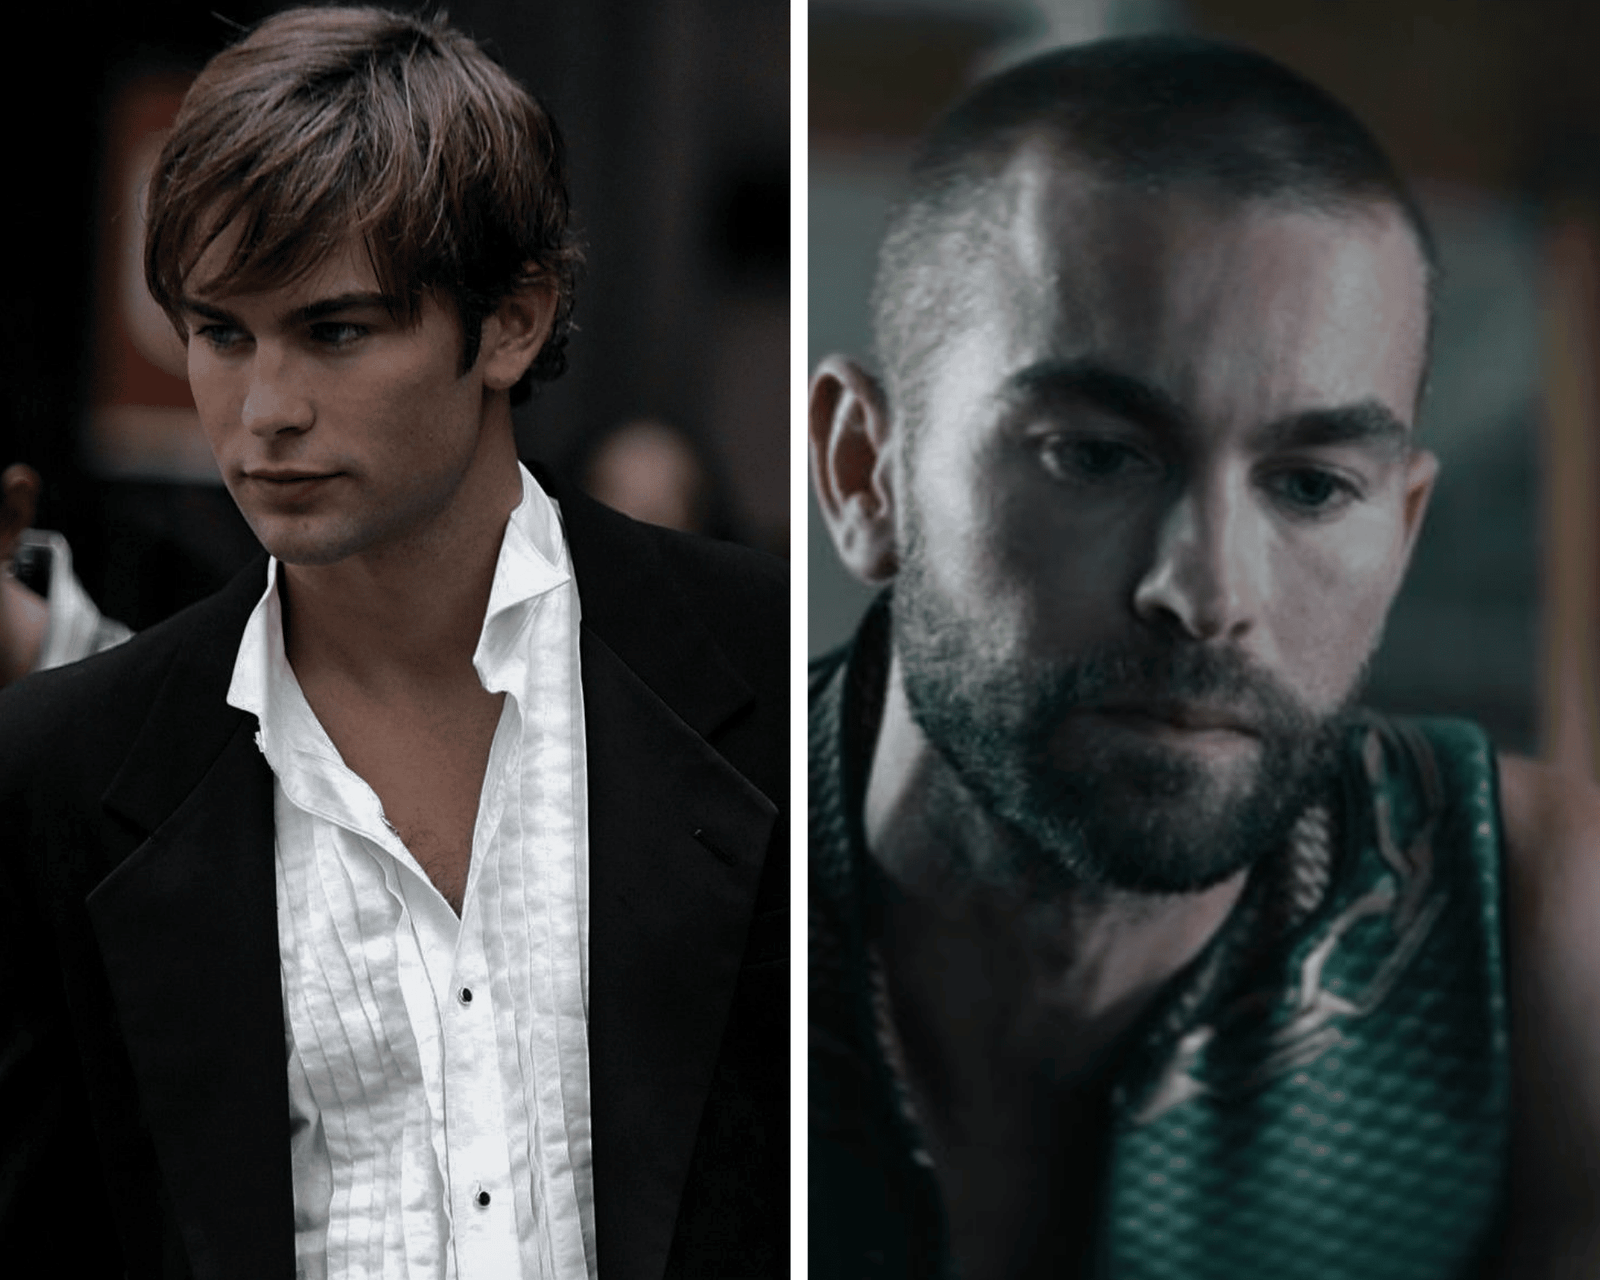 Gossip Girl Cast Members - Chace Crawford